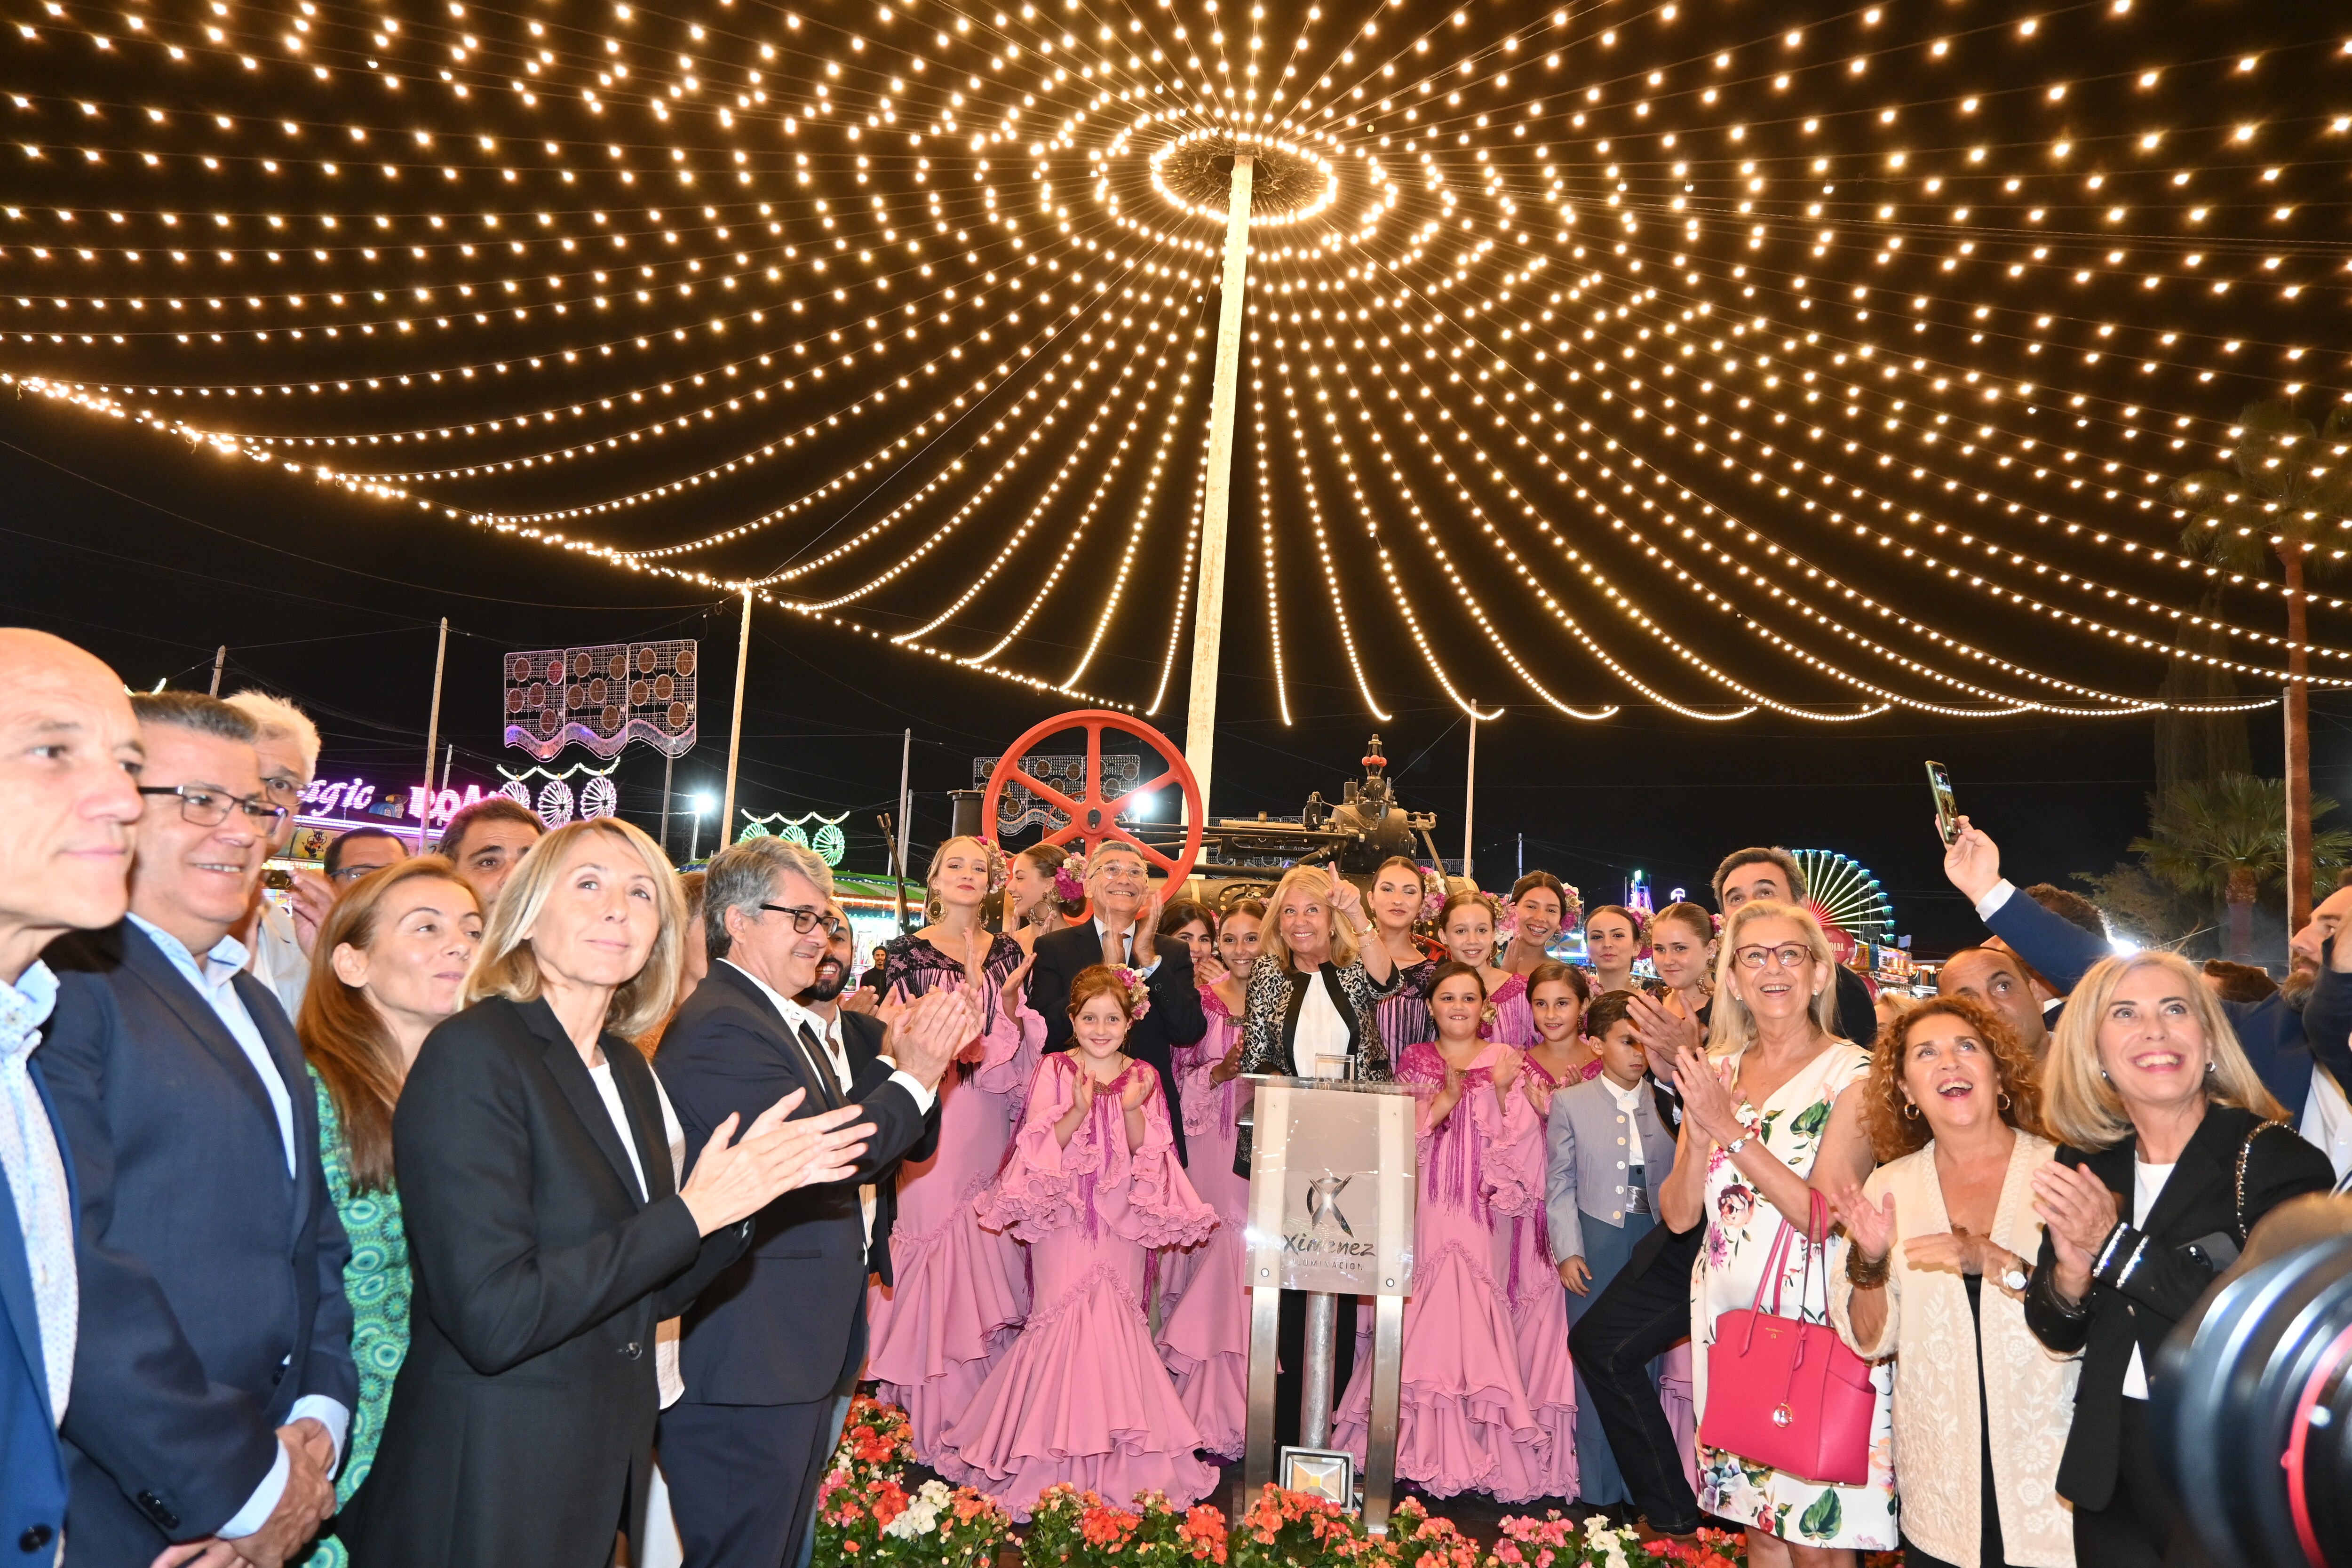 After a two-year hiatus, due to the Covid pandemic, the celebration was back in full swing at the town's new fairground